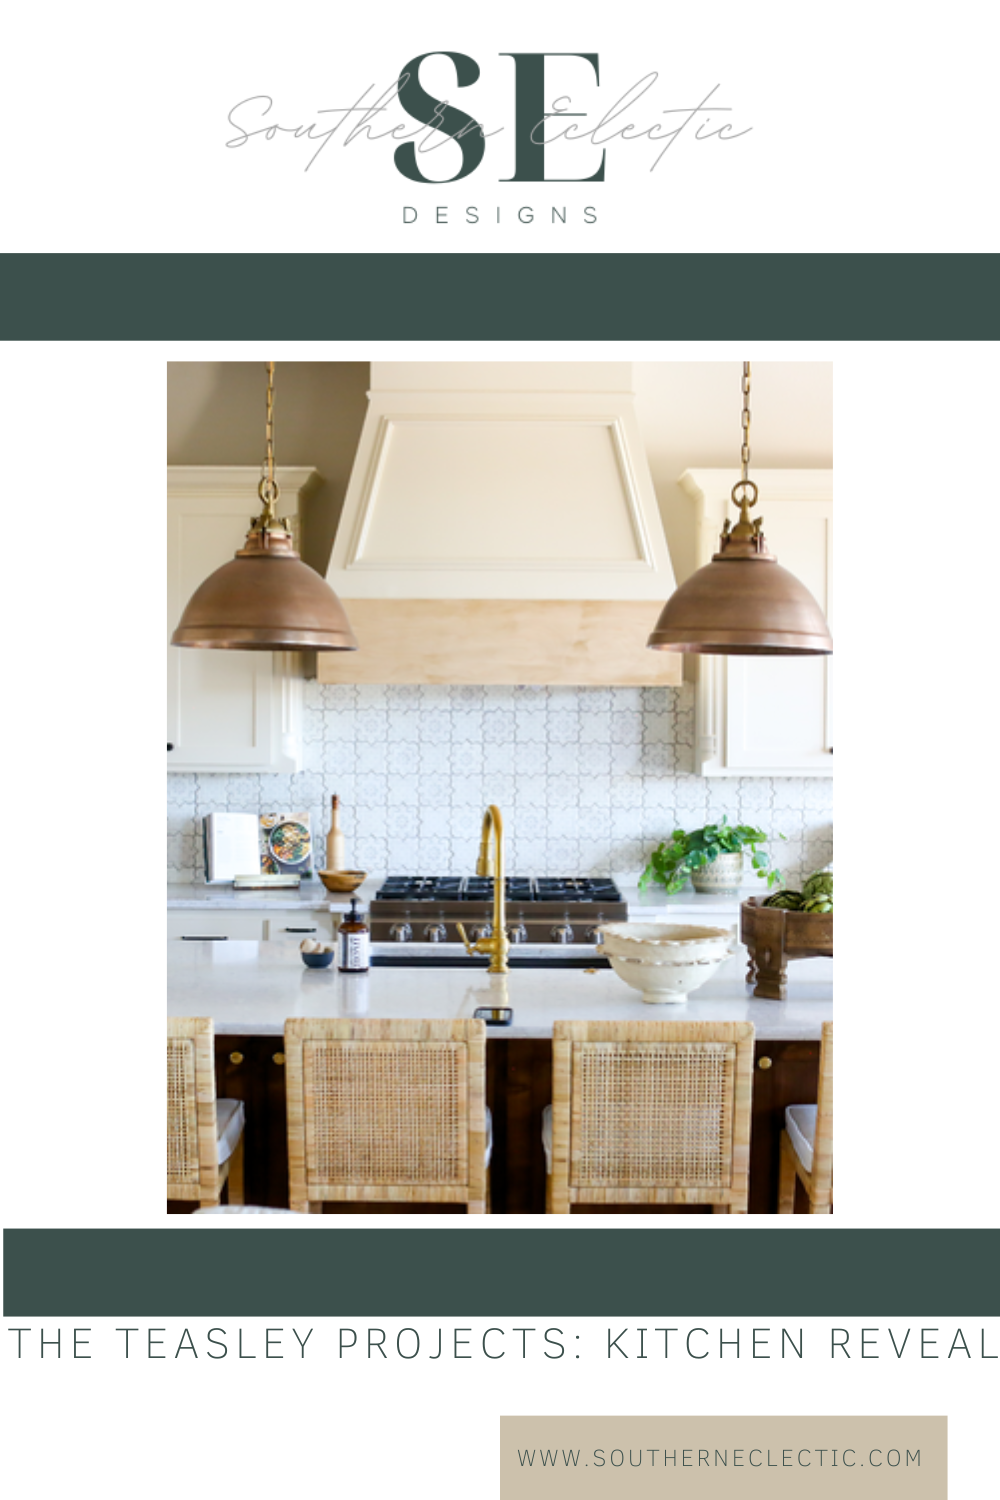 The Teasley Projects: Kitchen Reveal